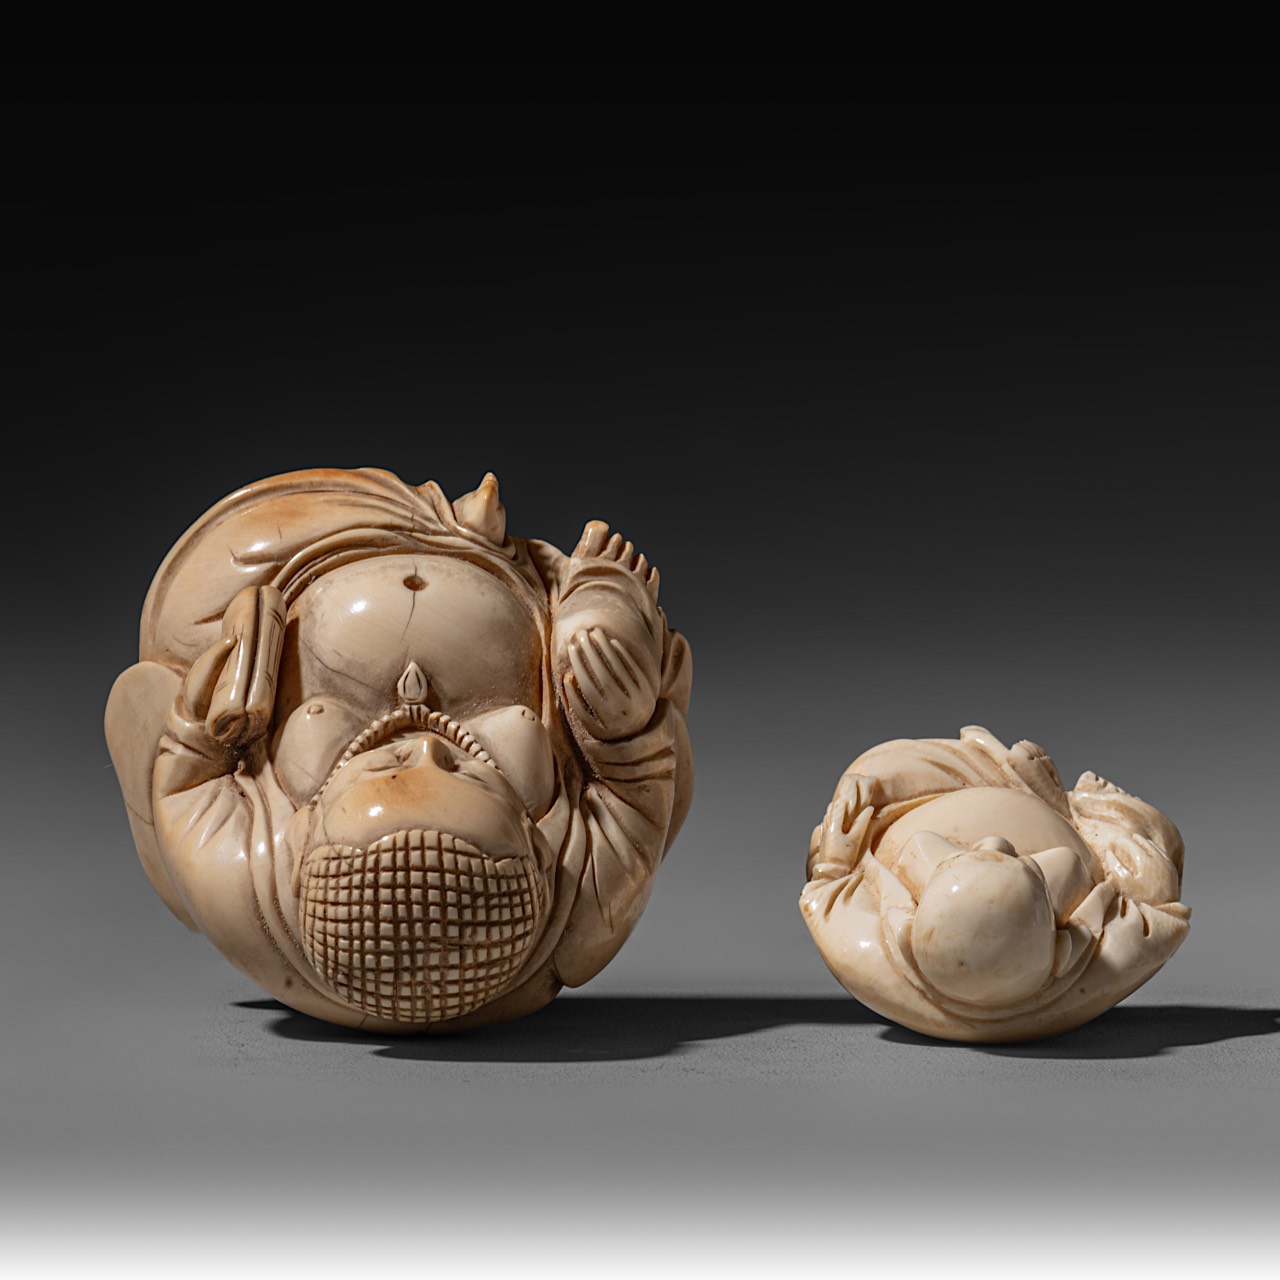 Two ivory sitting Budai figures, the smallest of them walrus ivory, both on a wooden base, H 5,3 - 7 - Image 7 of 8